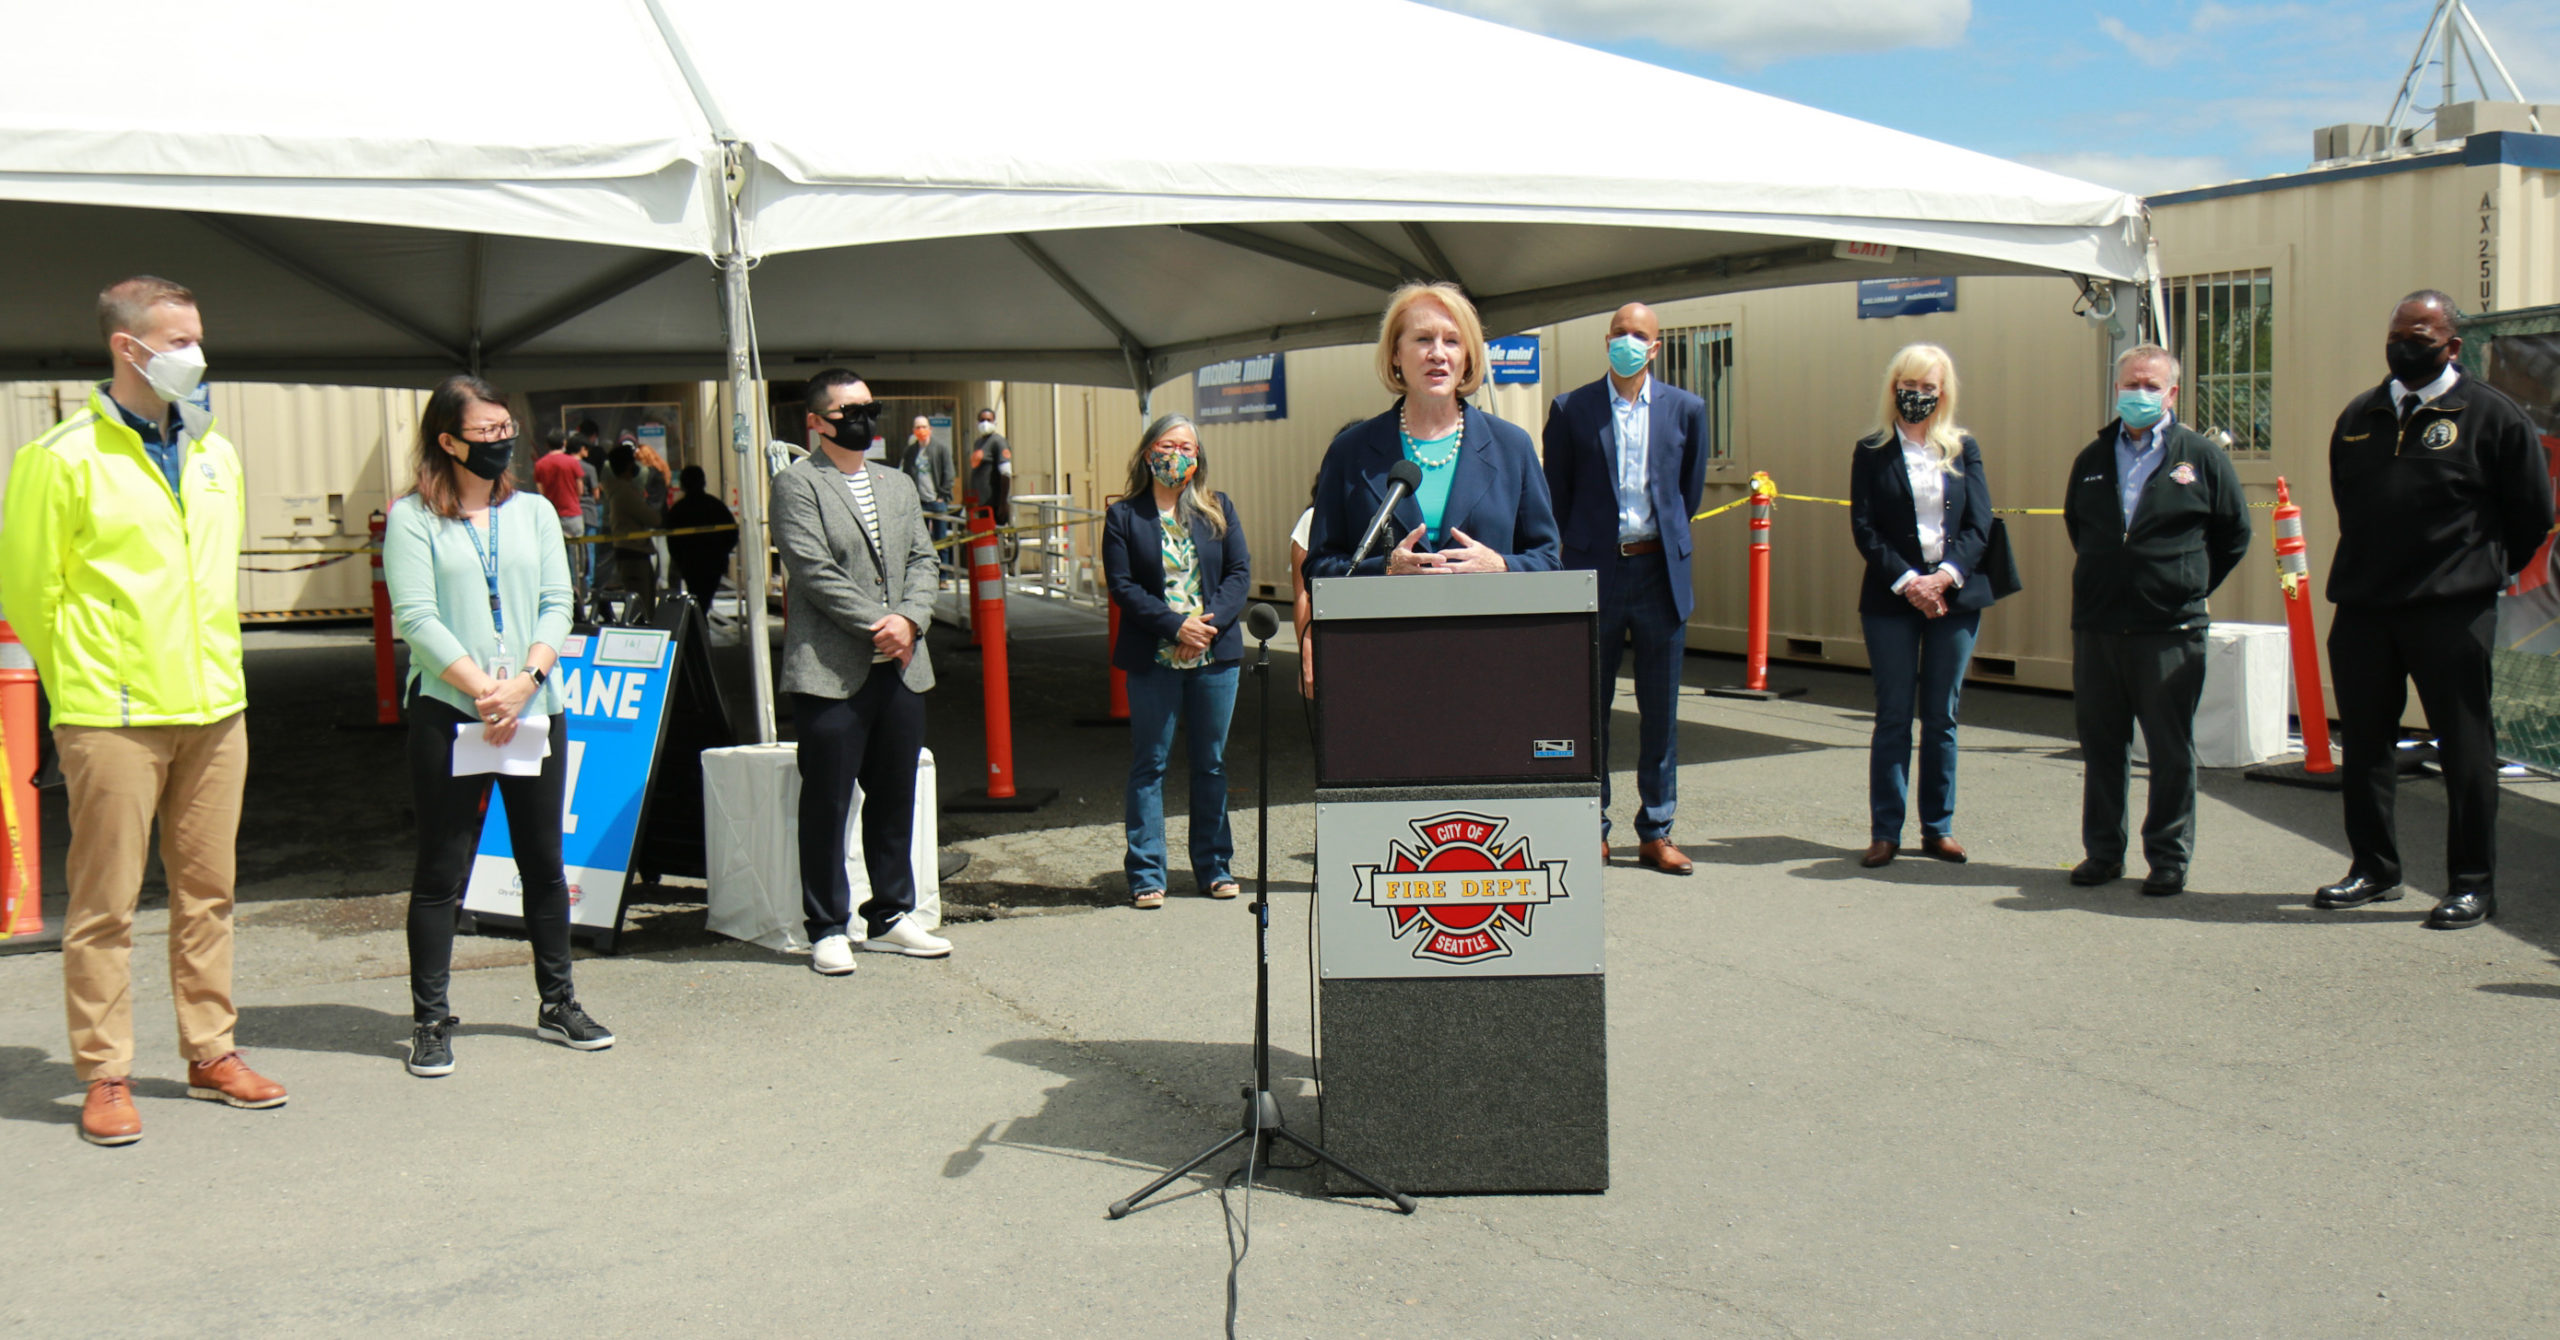 Photo: Mayor Durkan and other City and local leaders at press conference